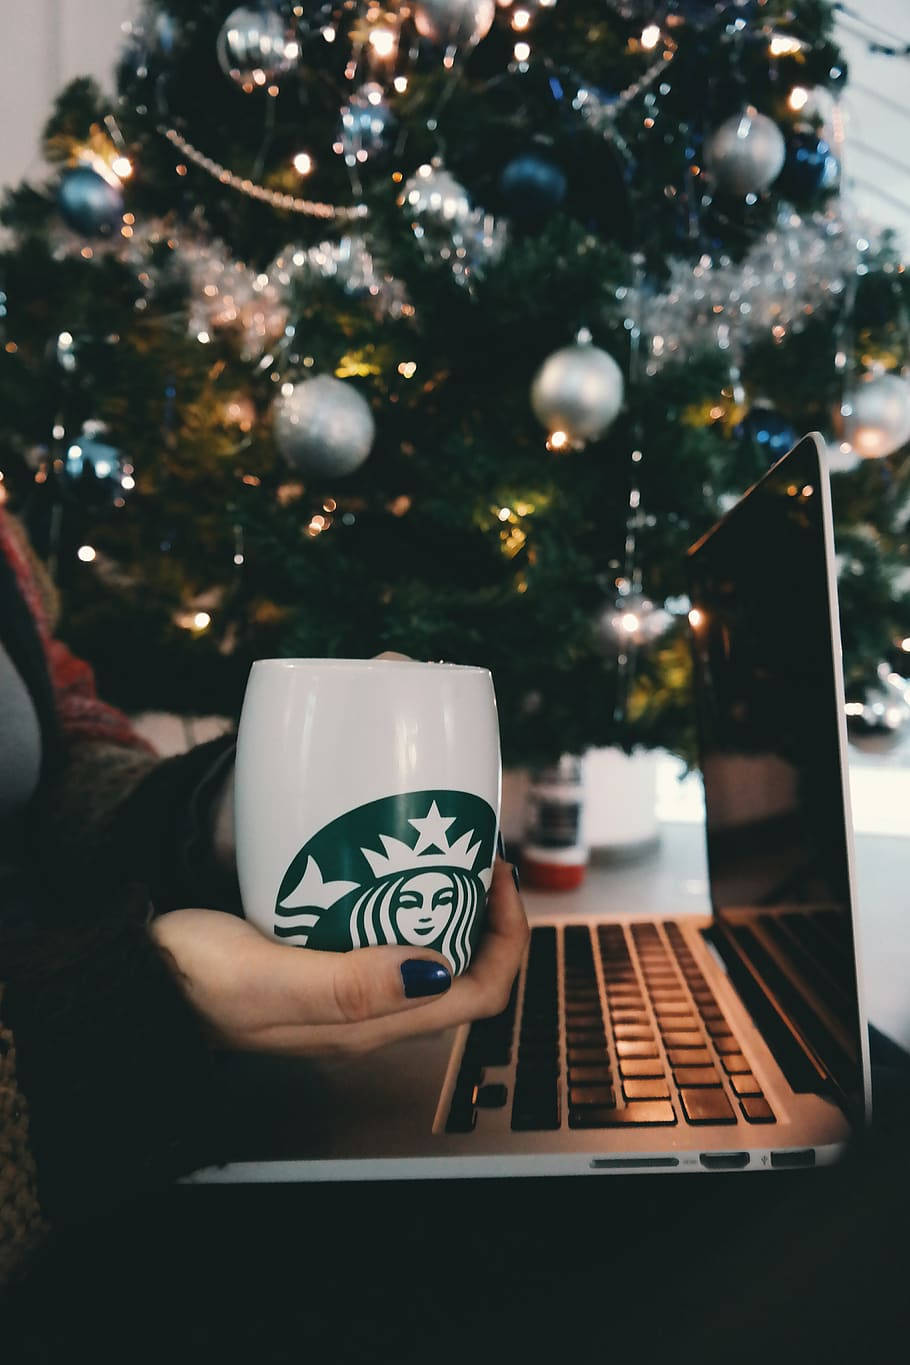 Coffee And Laptop Work On Christmas Background